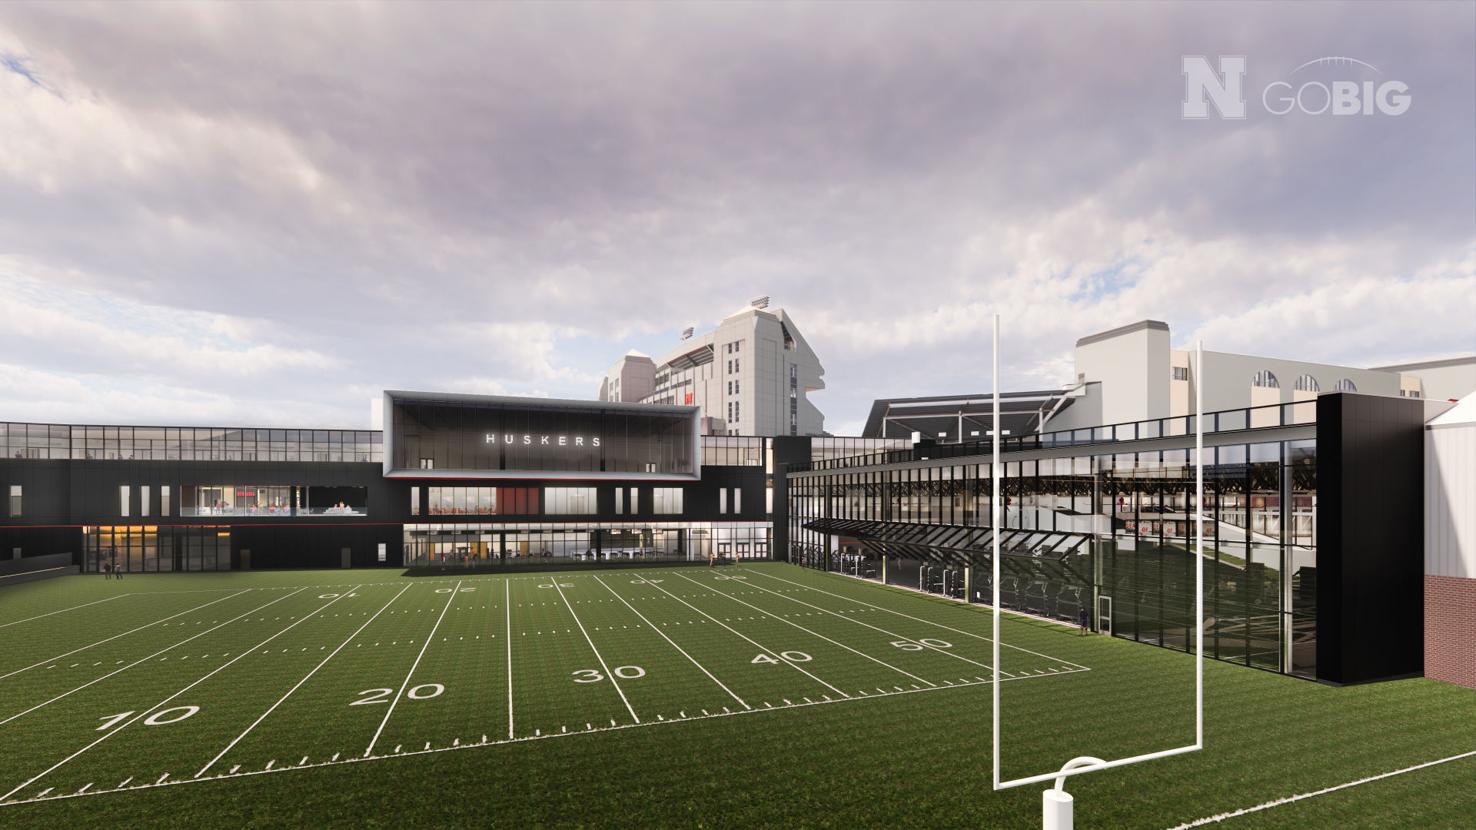 Check out these updated renderings of Nebraska's new football facility